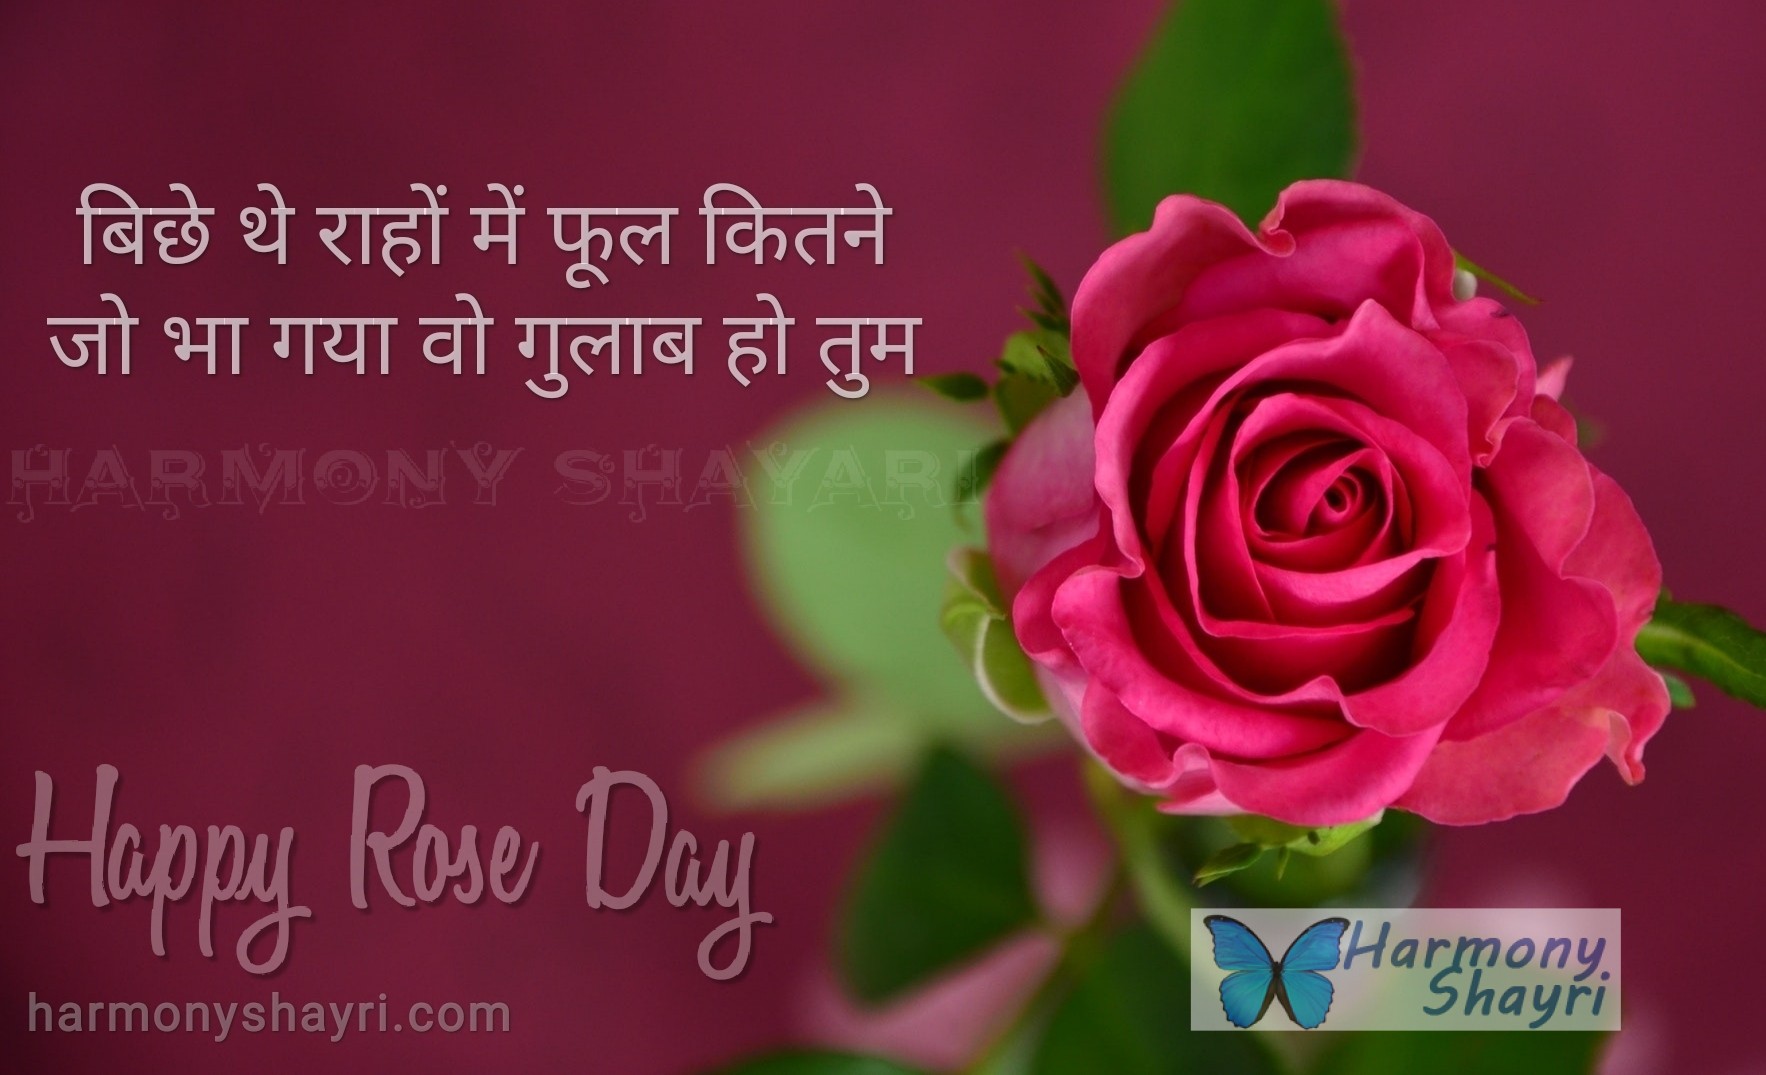 Bichhe the raahon mein – Happy Rose Day